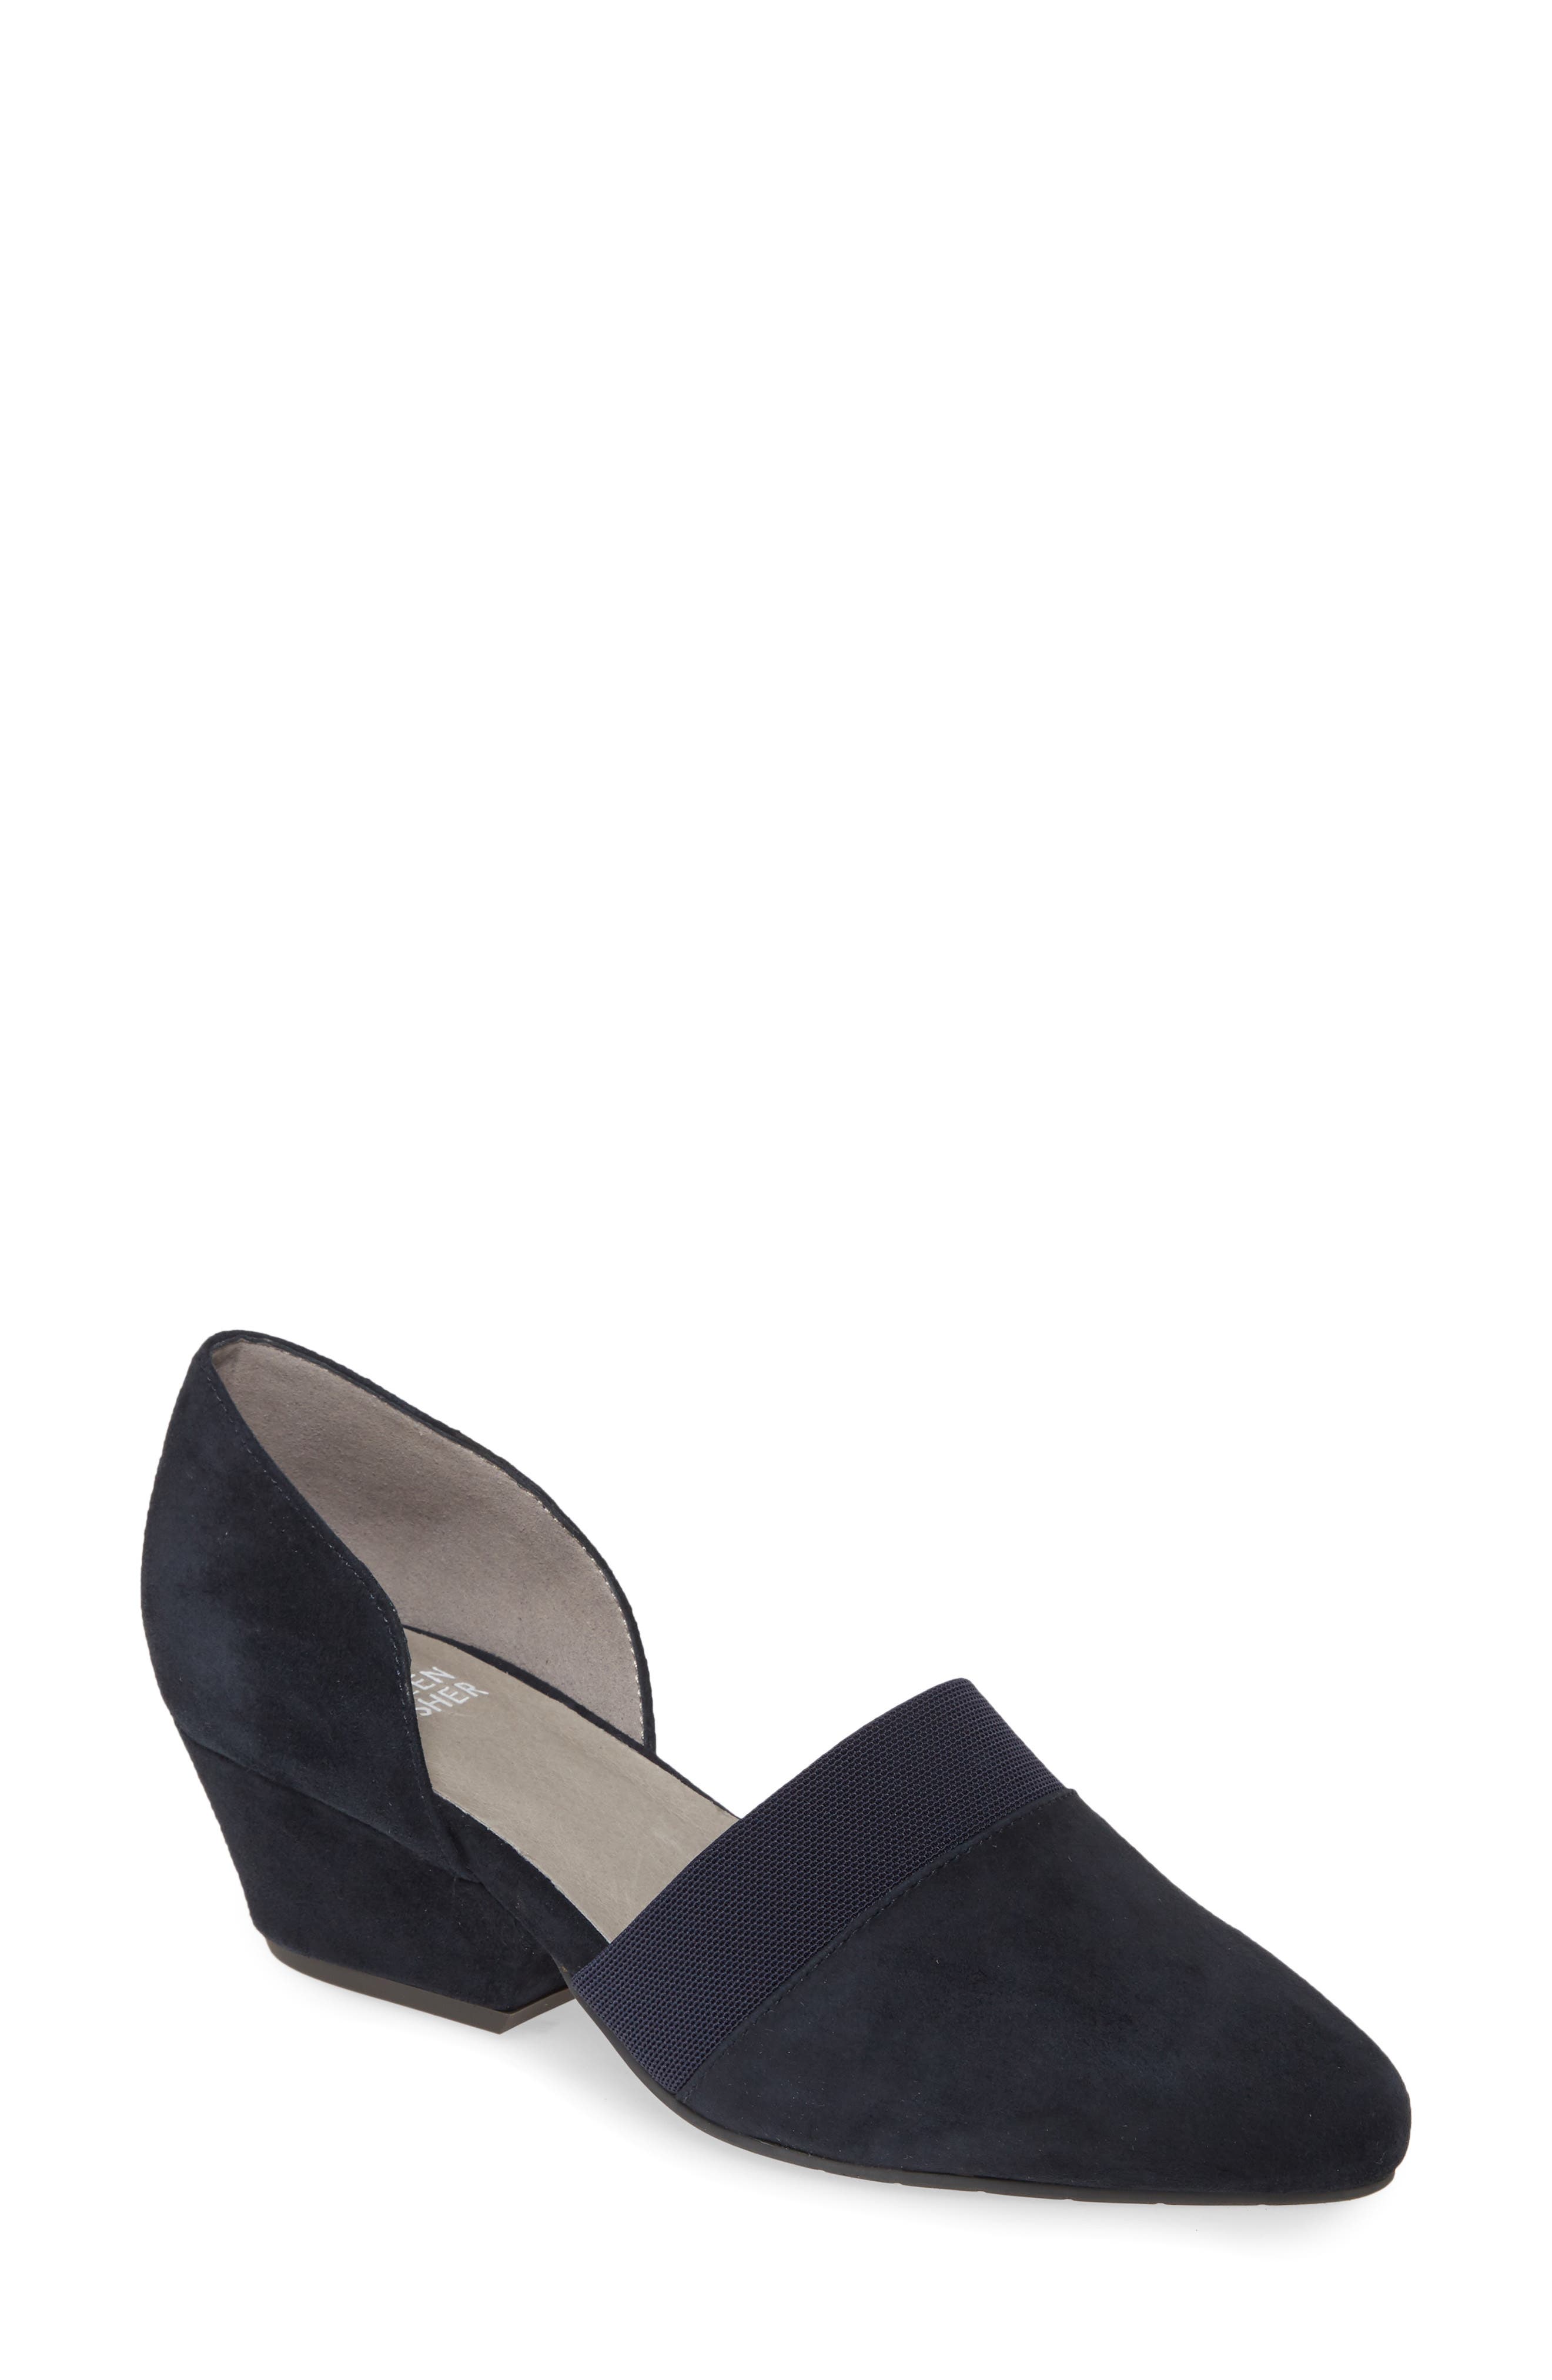 Eileen Fisher | Hilly d'Orsay Pump 